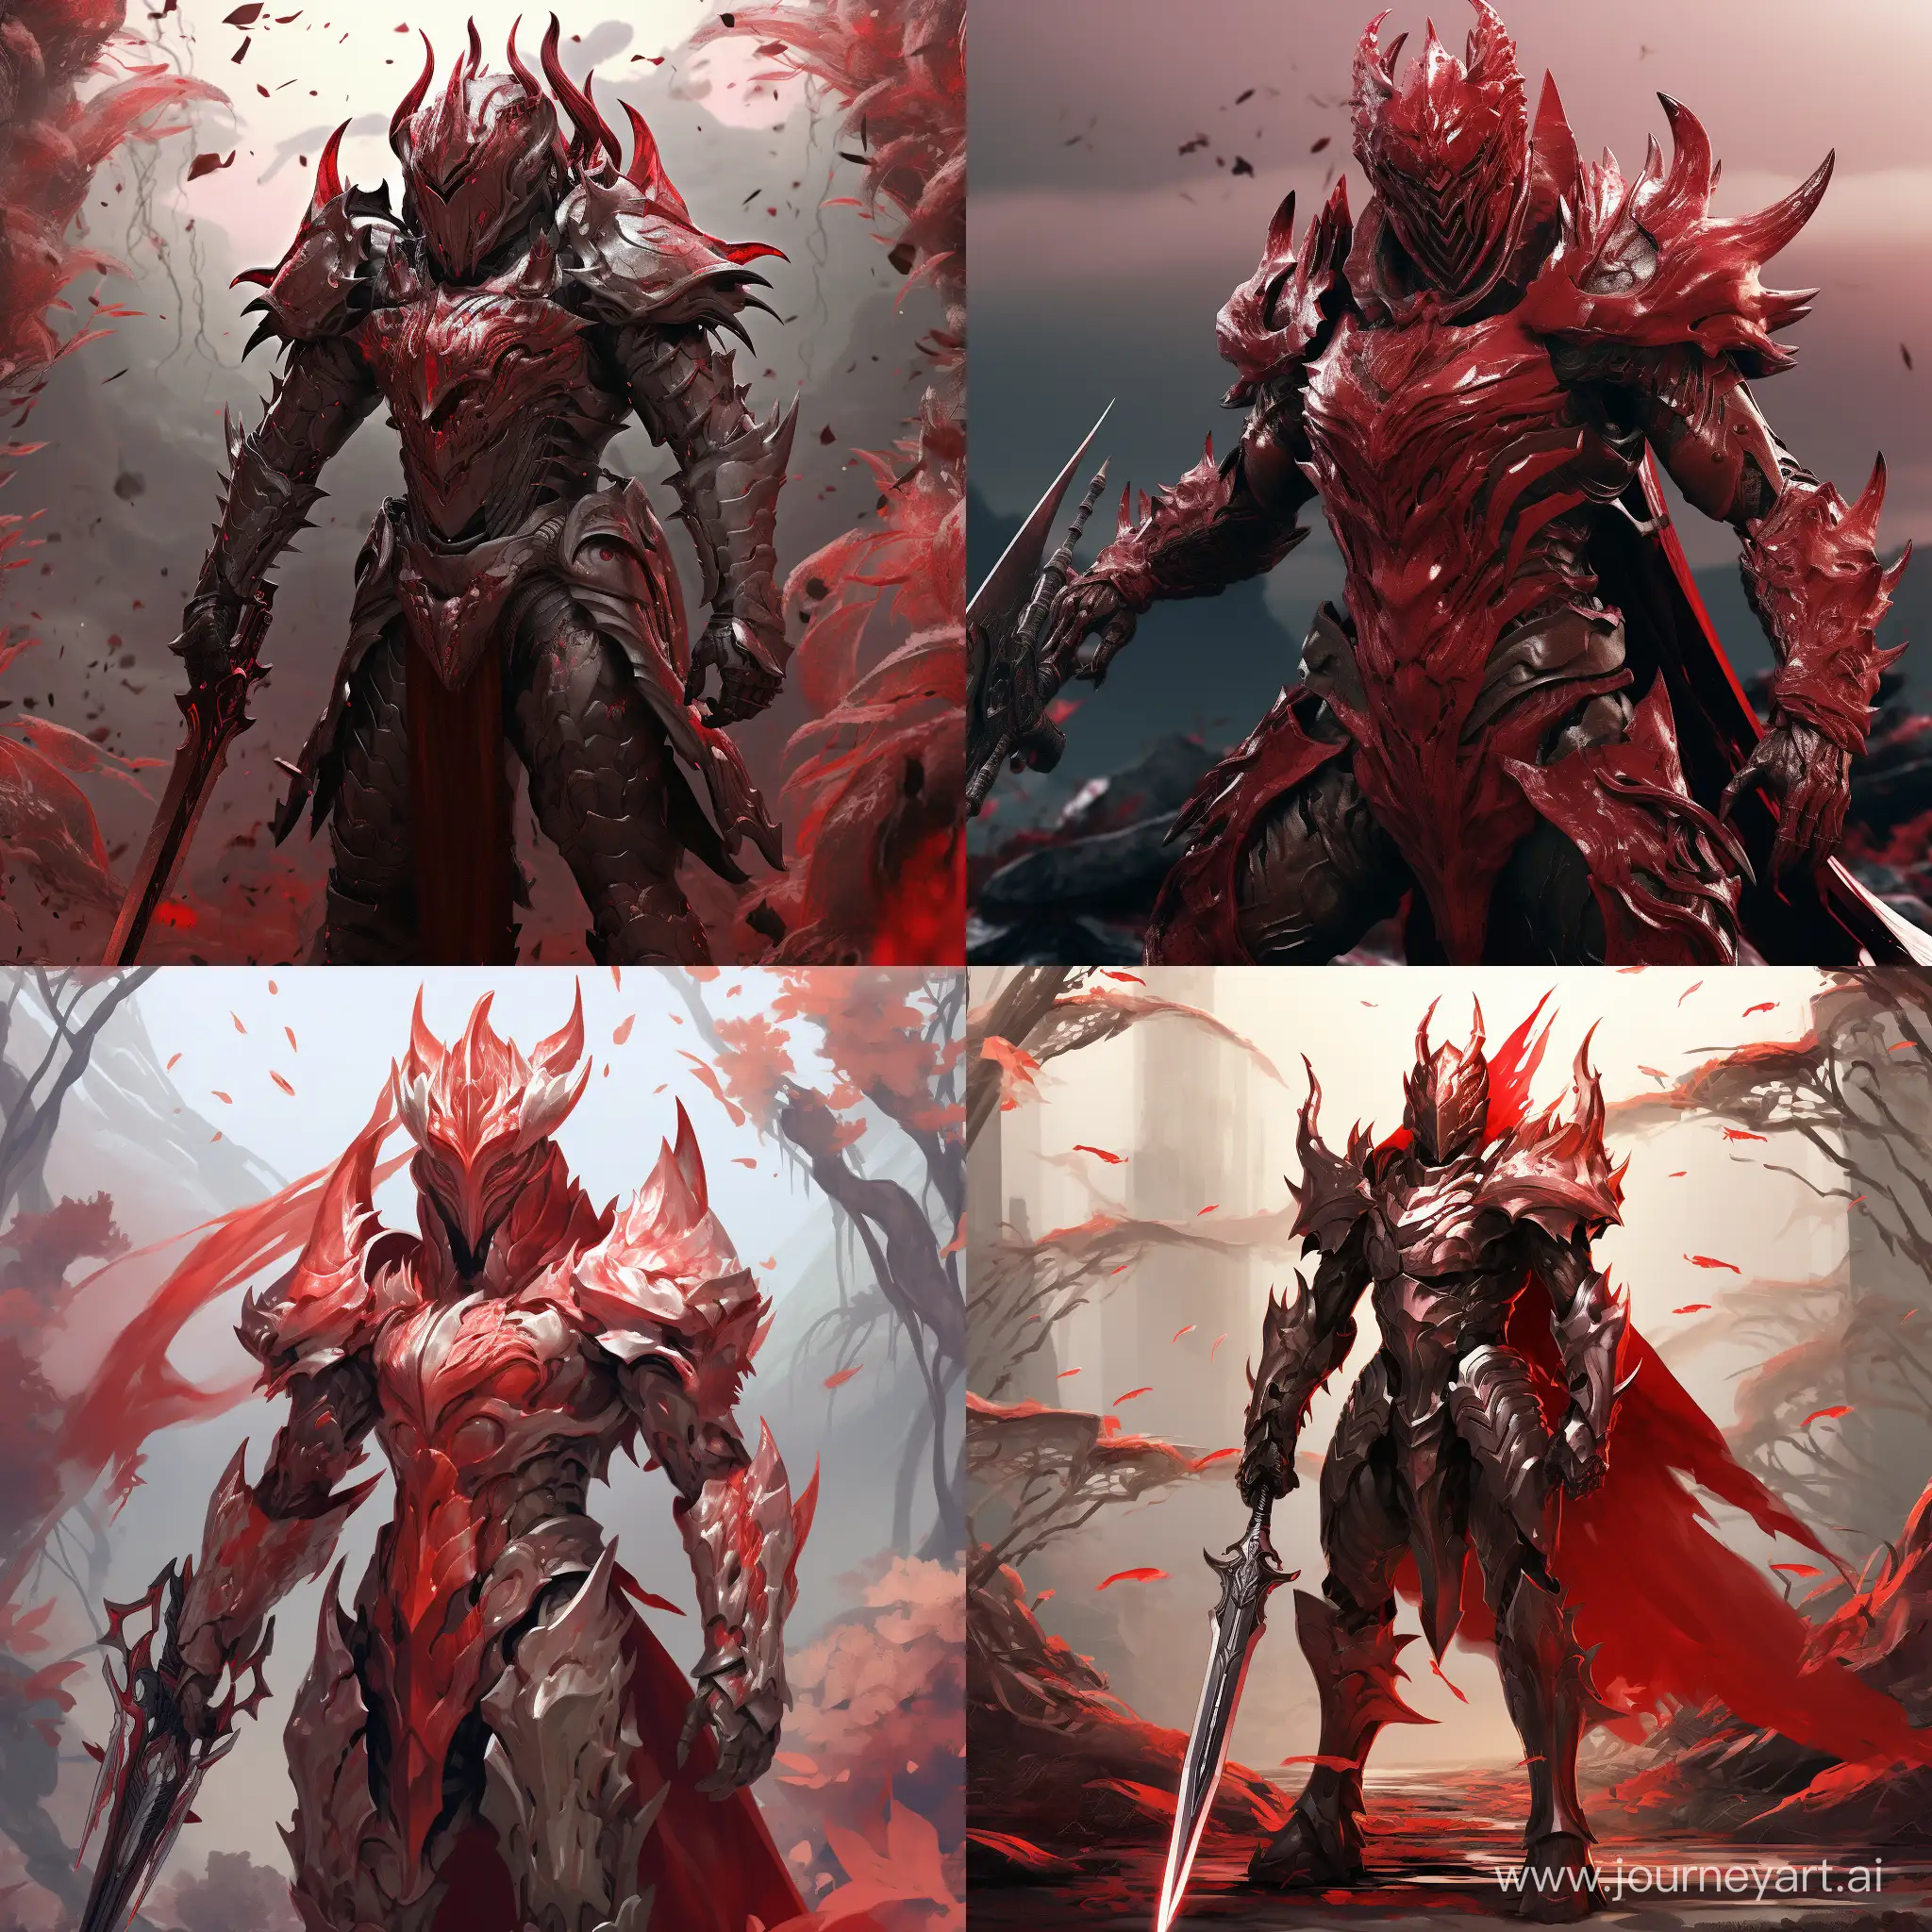 Medieval fantasy armor, full-plate armor, construct, no human features, a living armor, red color, crimson armor, red dragon scale armor, holding enchanted dark spear, flower field background, helmet in the shape of a normal helmet, not draconic design, realistic armor, no exagerated details, no horns, good lightning, clear view, warrior pose, minimalist armor